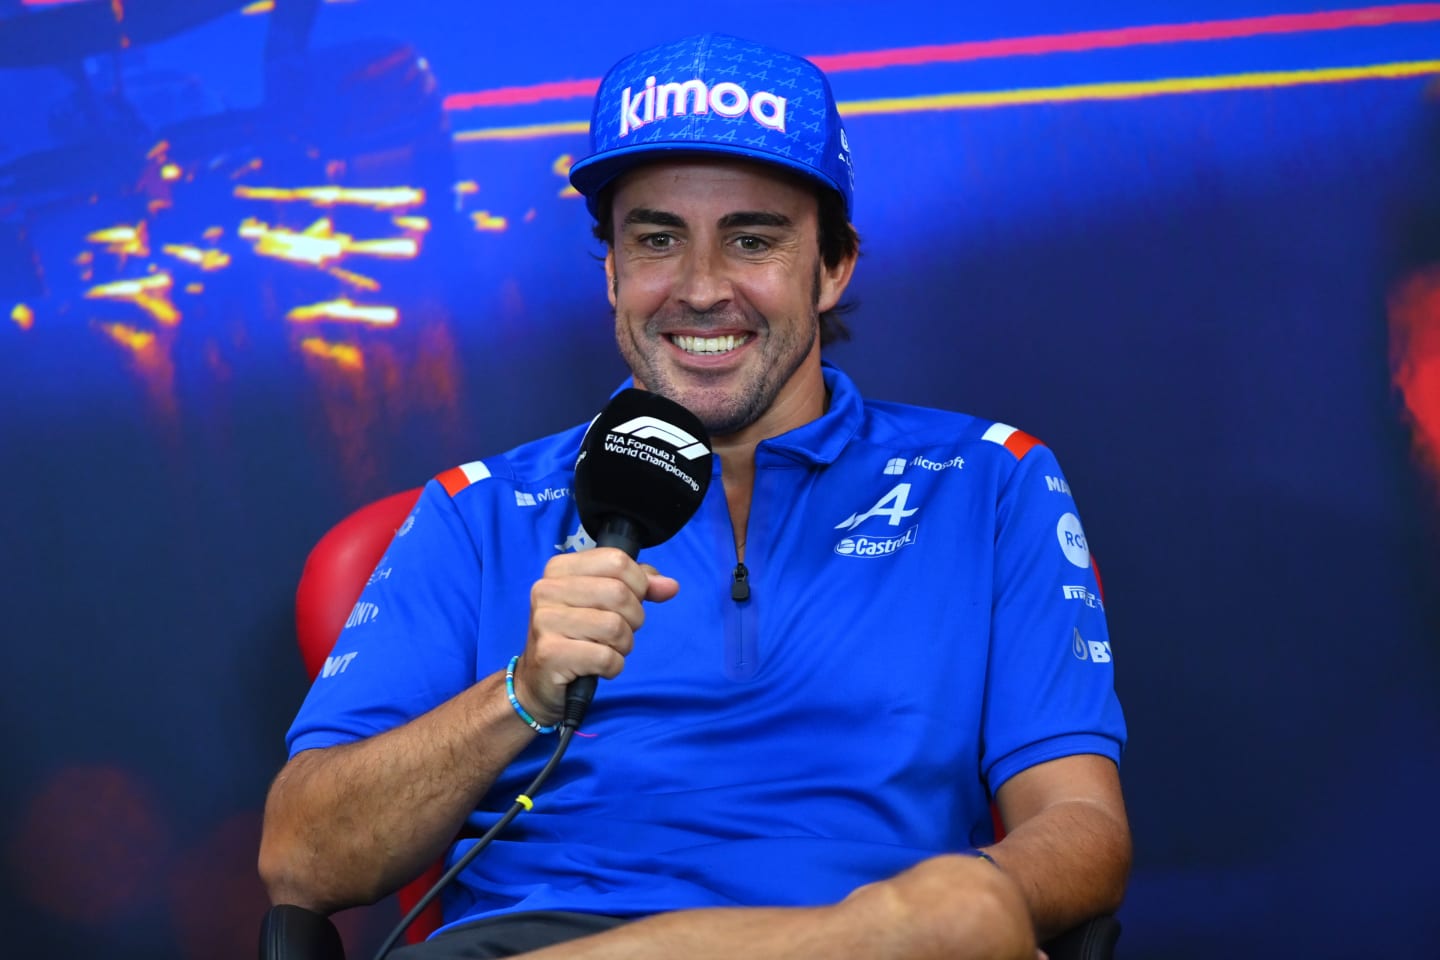 SPA, BELGIUM - AUGUST 25: Fernando Alonso of Spain and Alpine F1 talks in the Drivers Press Conference during previews ahead of the F1 Grand Prix of Belgium at Circuit de Spa-Francorchamps on August 25, 2022 in Spa, Belgium. (Photo by Dan Mullan/Getty Images)